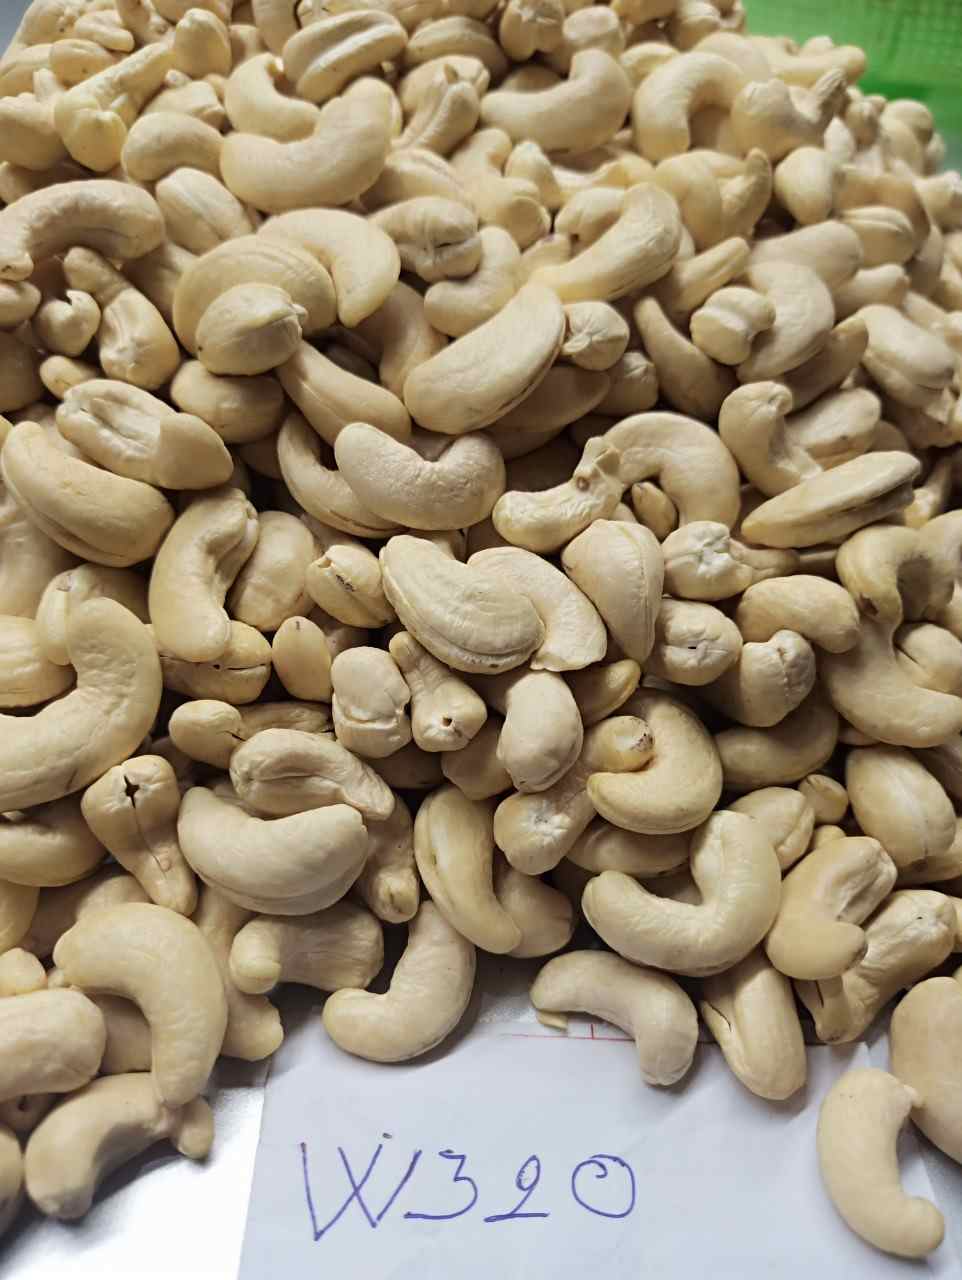 Raw Image Of W320 Cashew Nuts From Our Cashew Factory In Binh Phuoc, Vietnam - 2